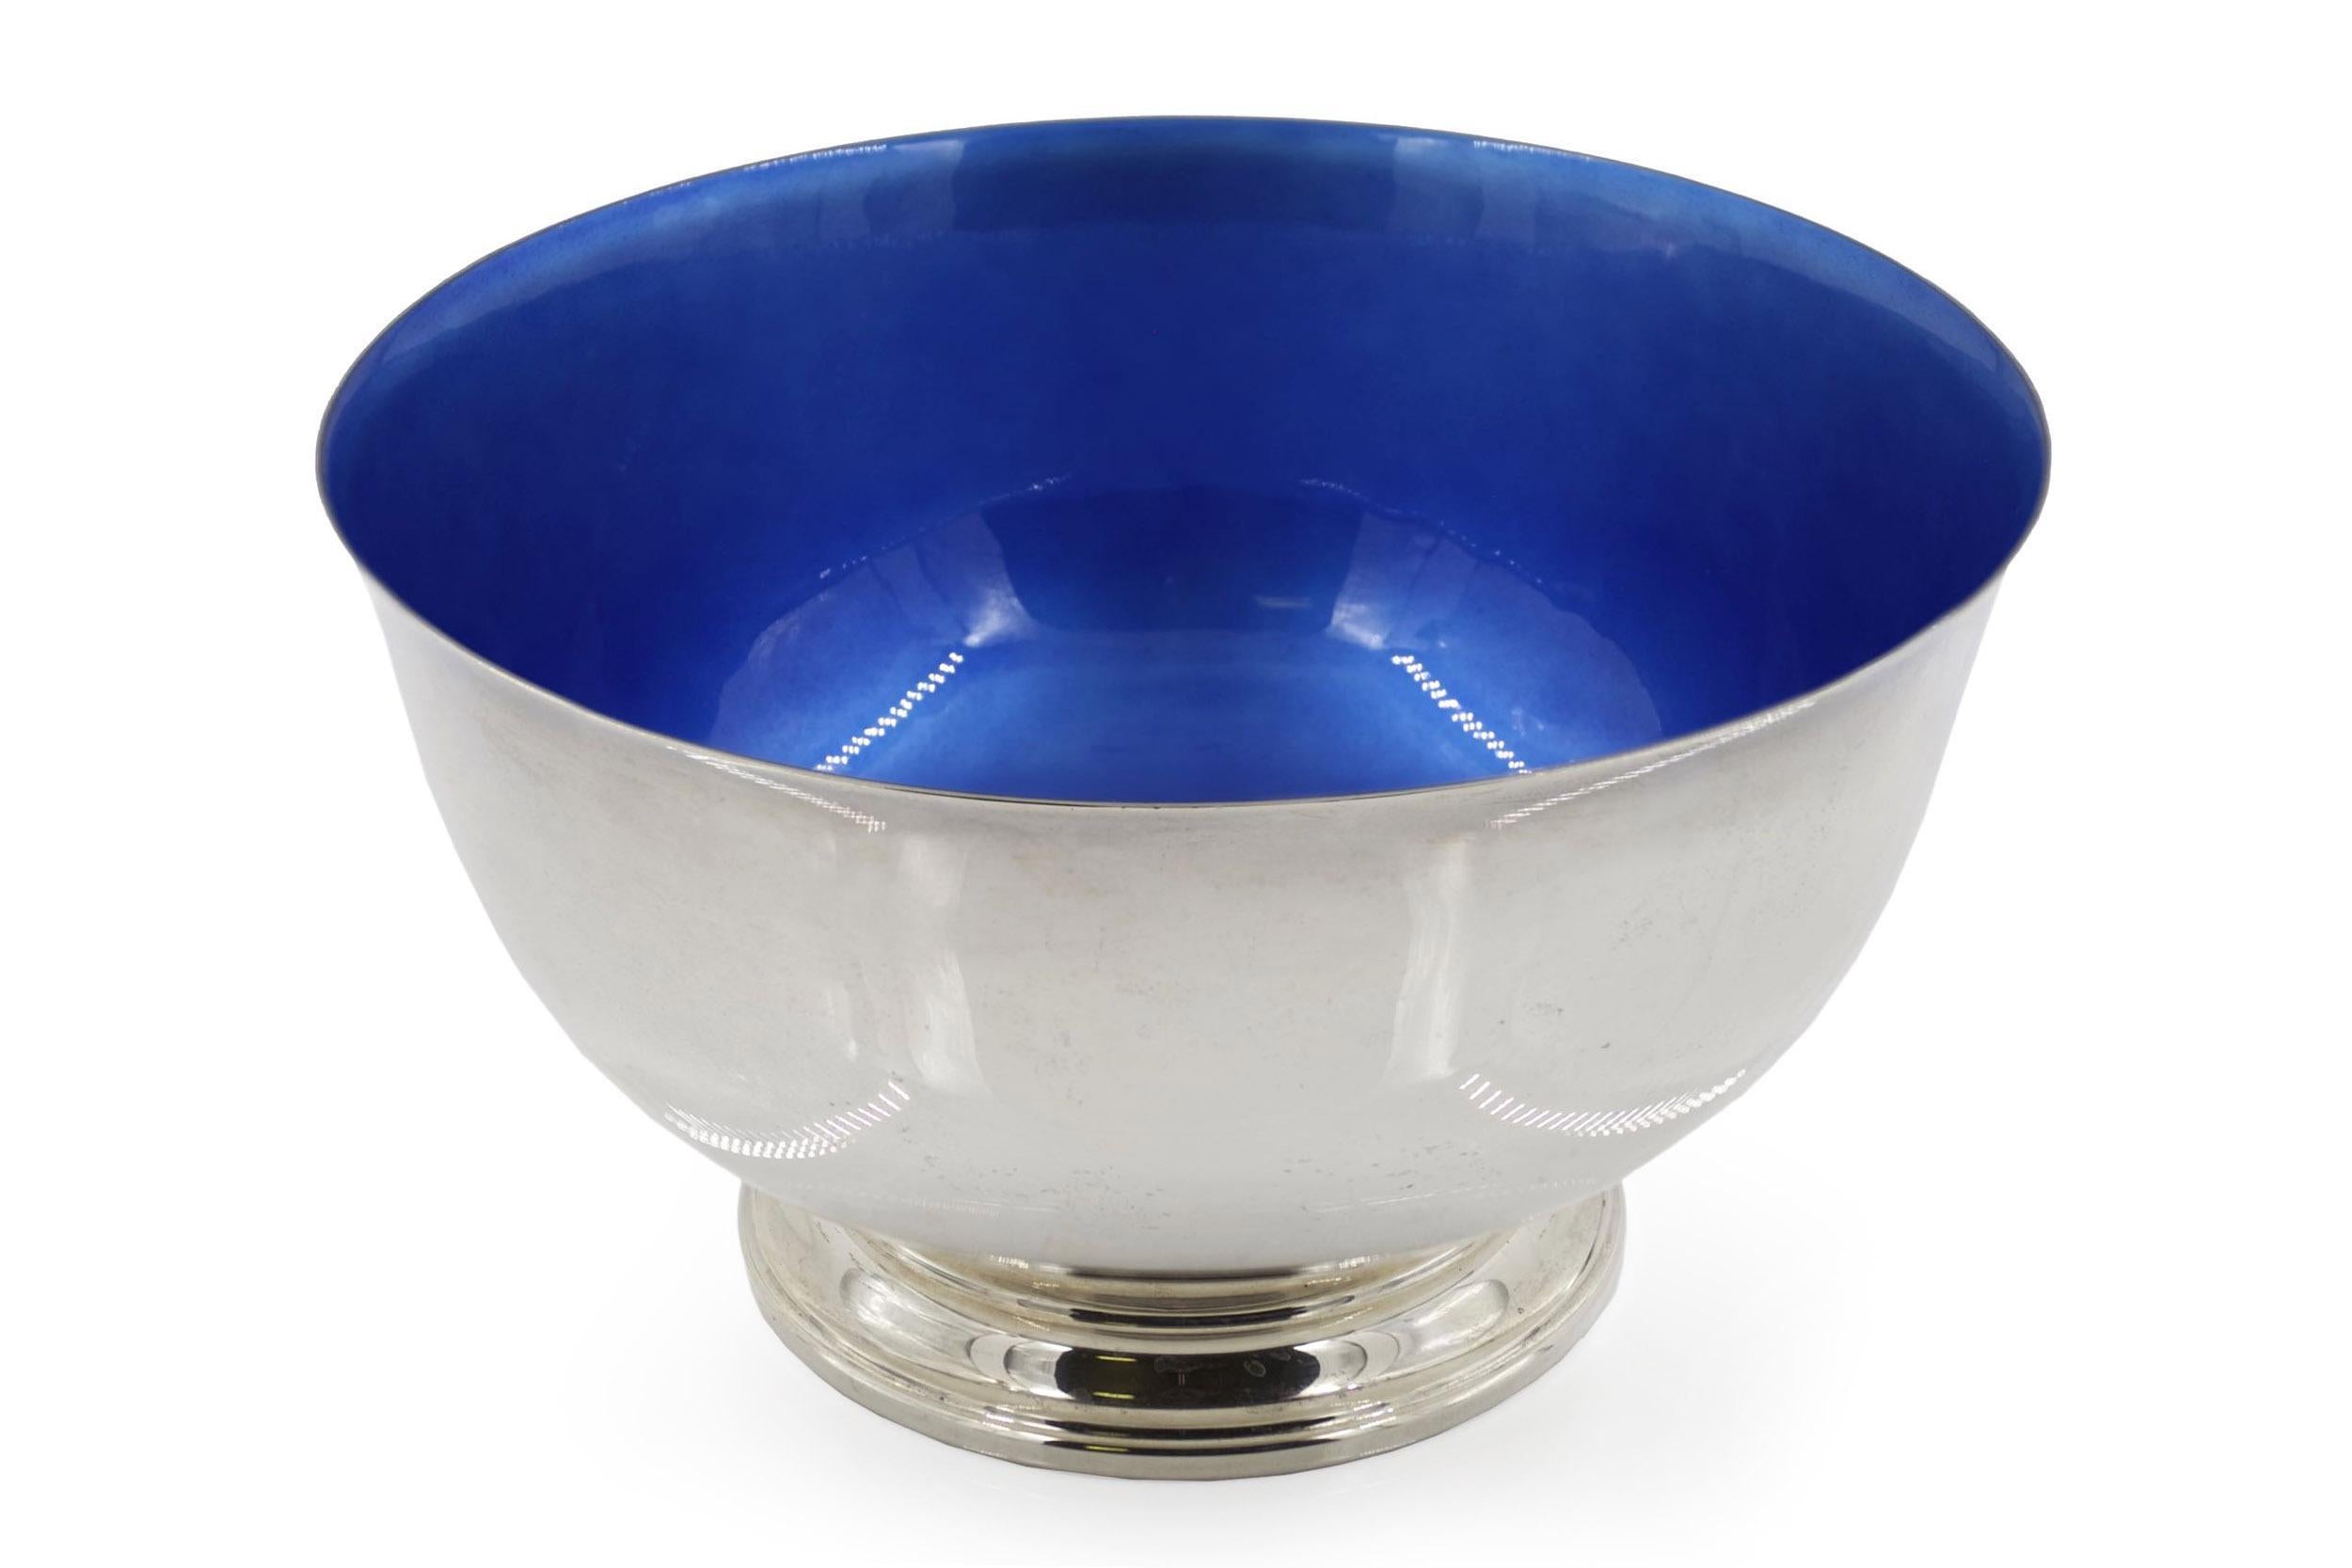 A gorgeous 1768 Paul Revere style reproduction bowl executed in solid sterling silver with an interior blue enamelled finish by Towle Silversmiths of Newburyport, Massachusetts, this bowl is number 523 from their collection. A beautiful piece that